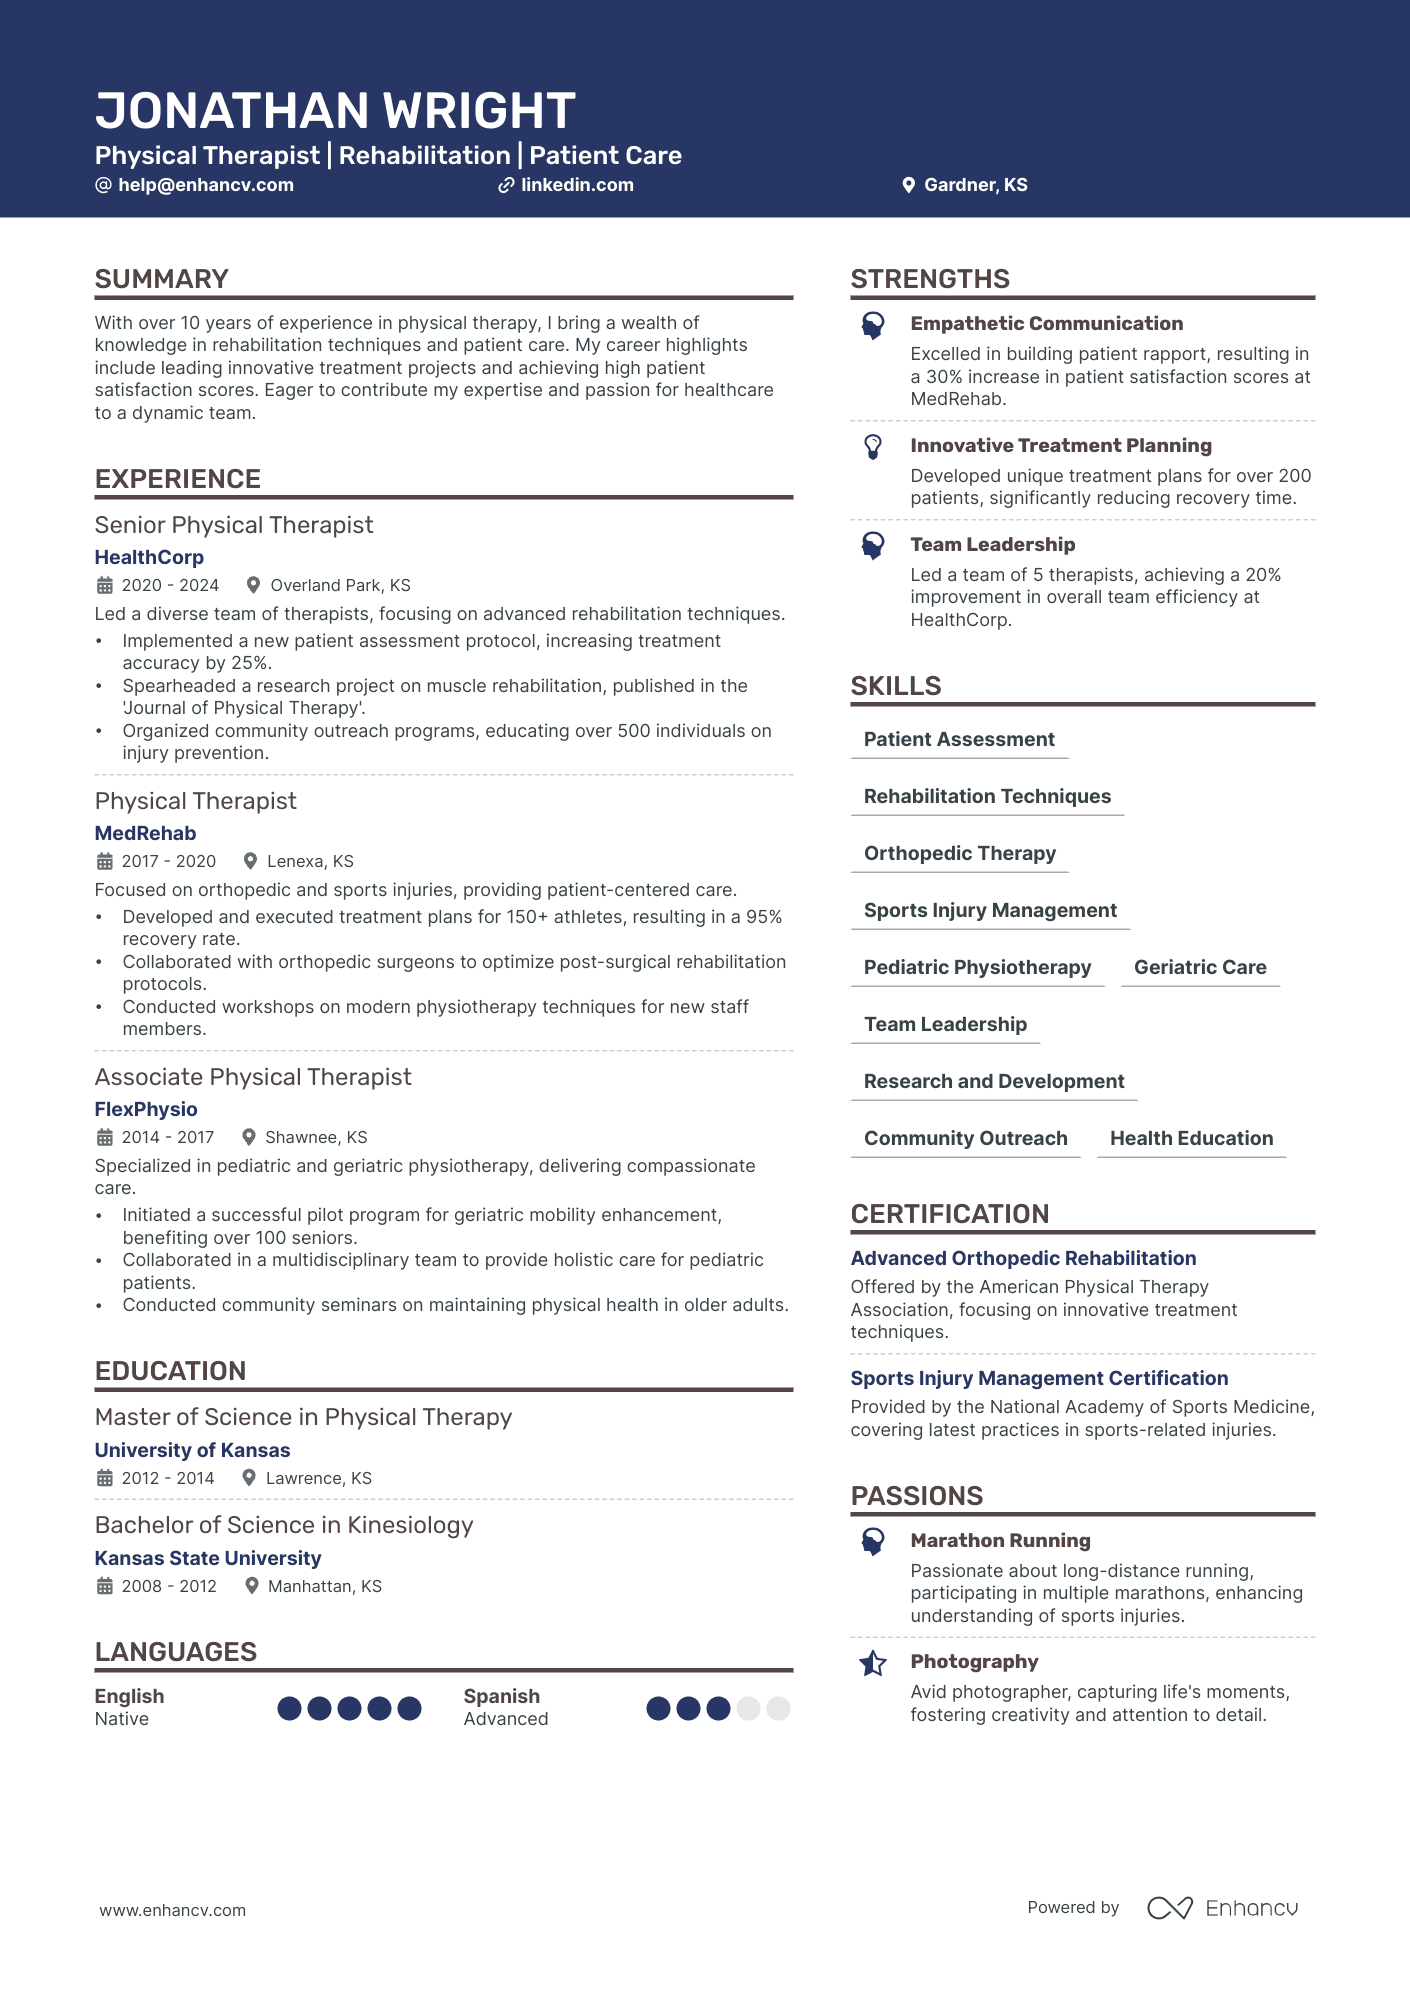 Physical Therapist resume example